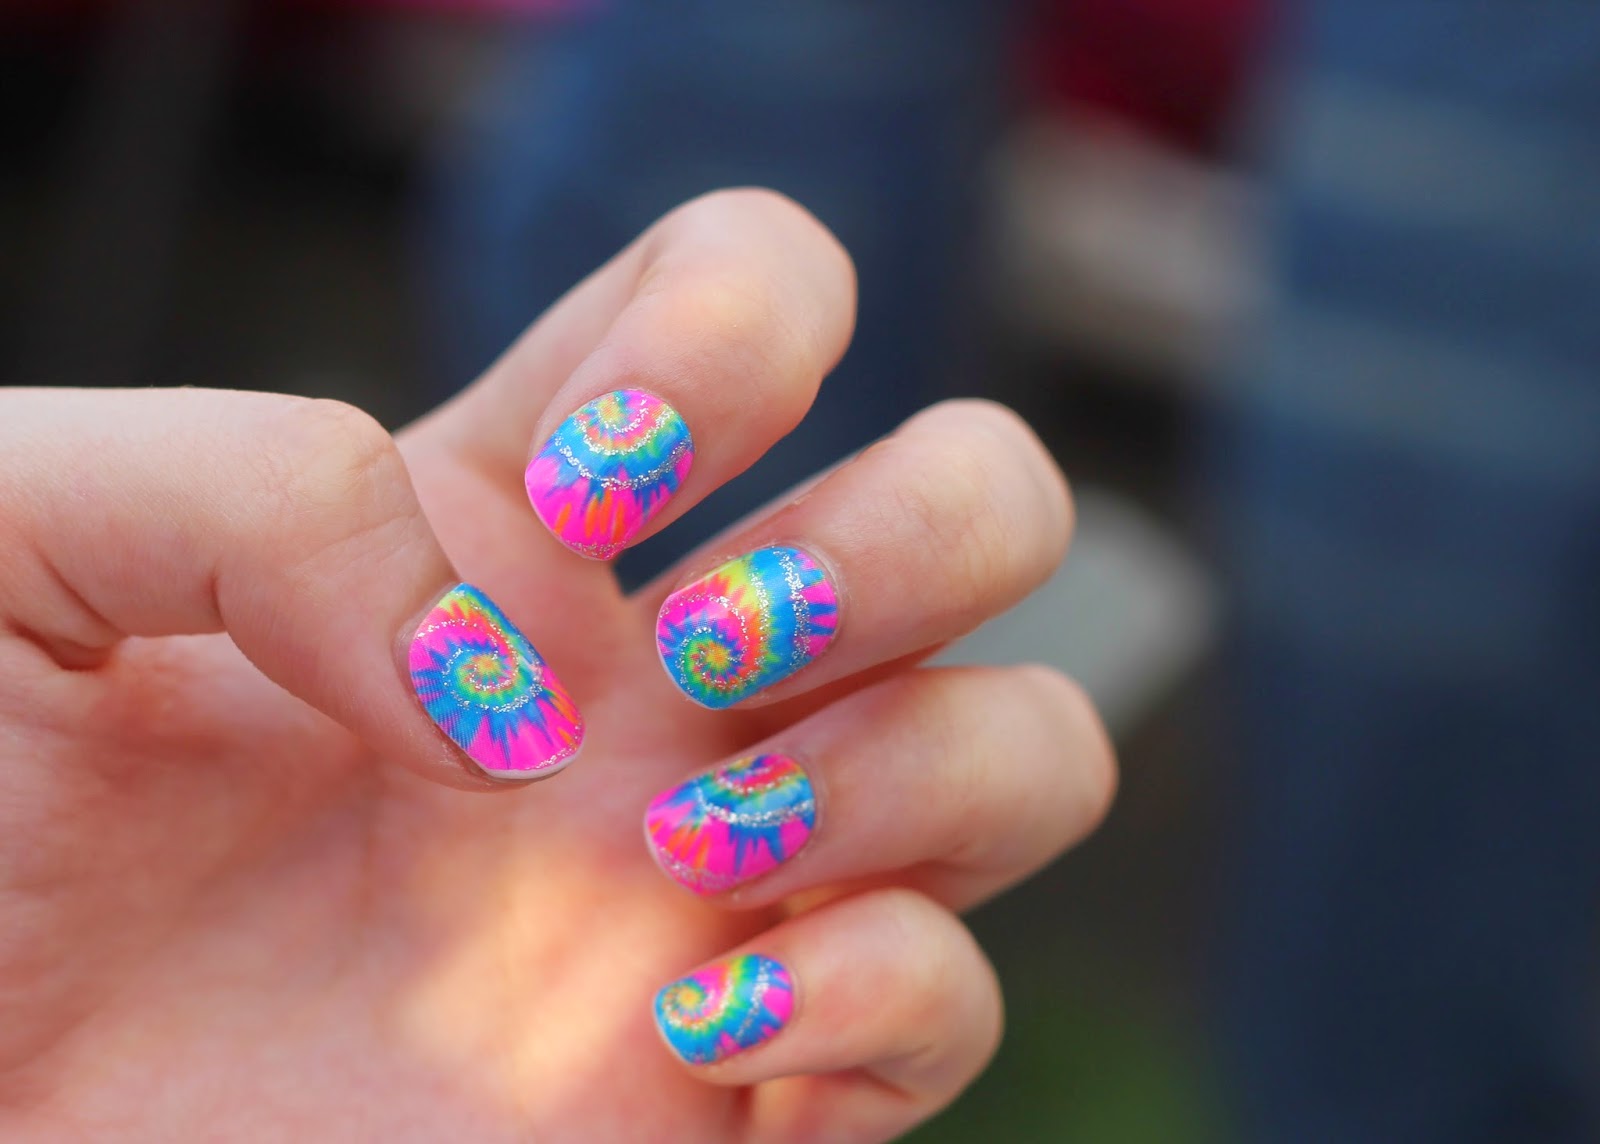 Country Music Festival Nails - wide 8